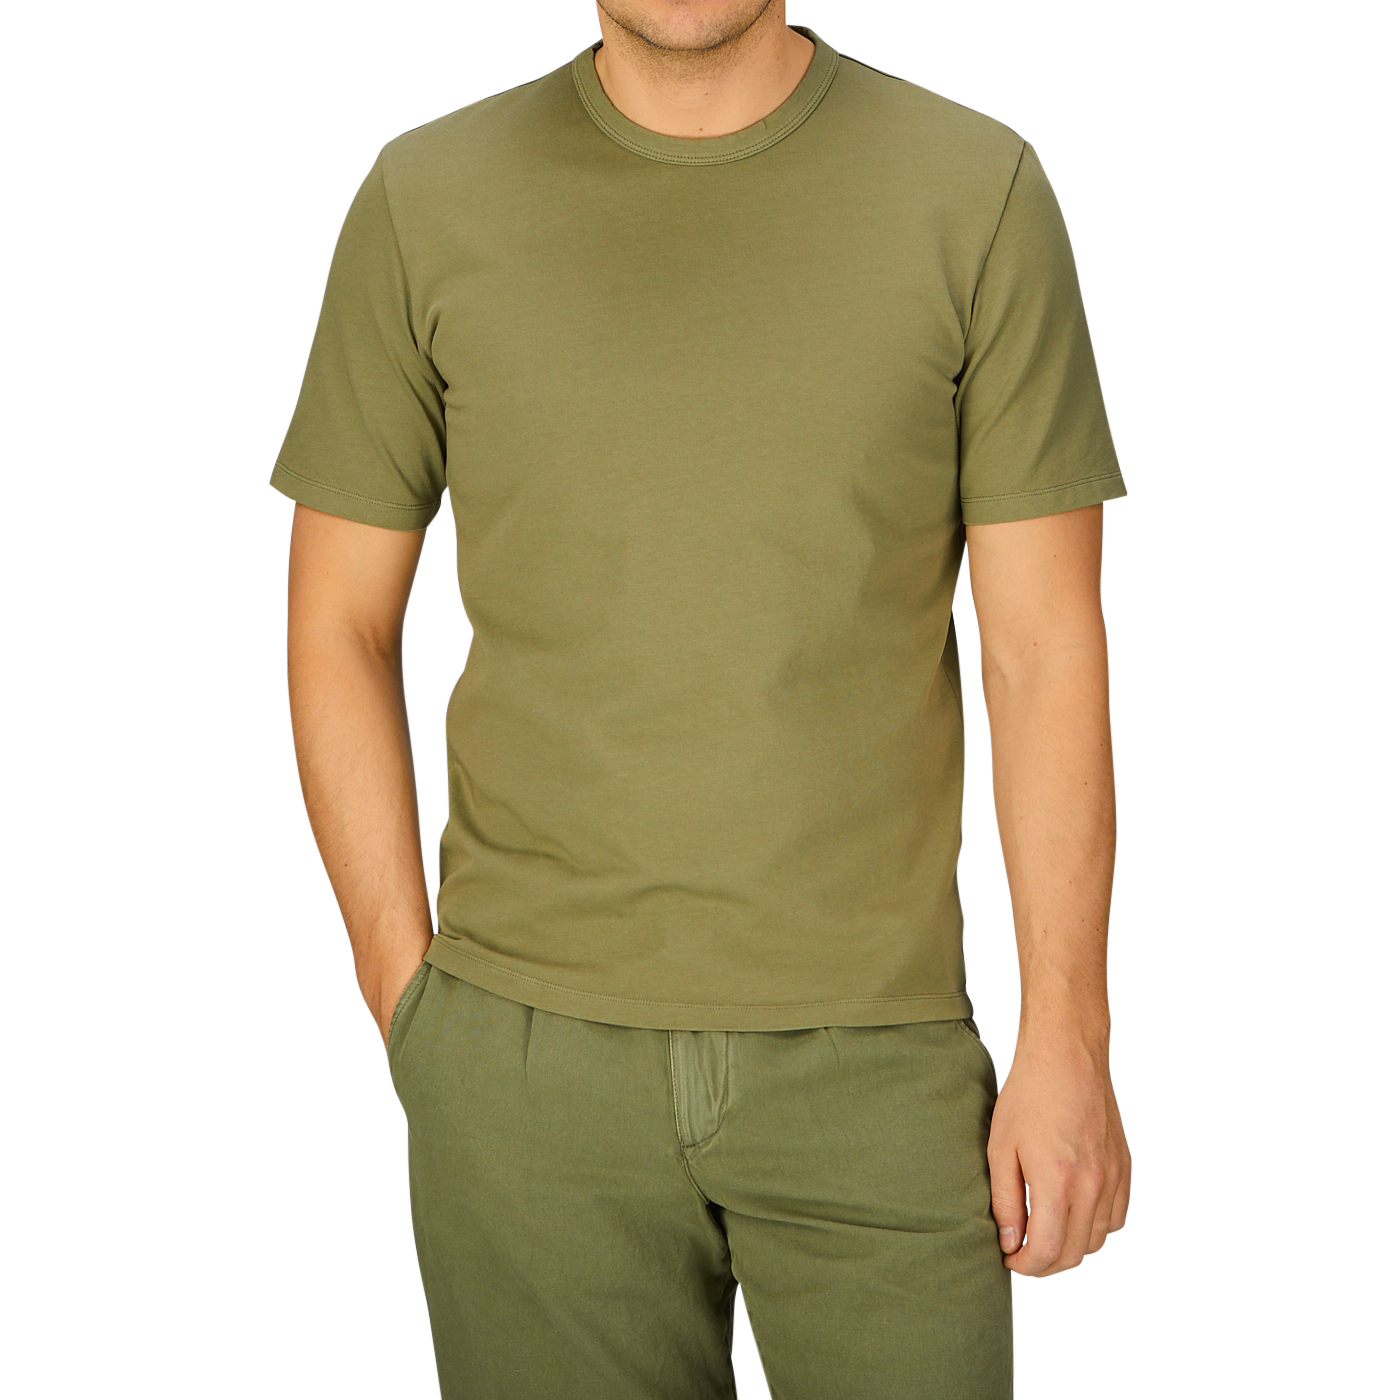 A person wearing a plain Olive Green Heavy Organic Cotton T-Shirt by Tela Genova and matching pants against a blue background.